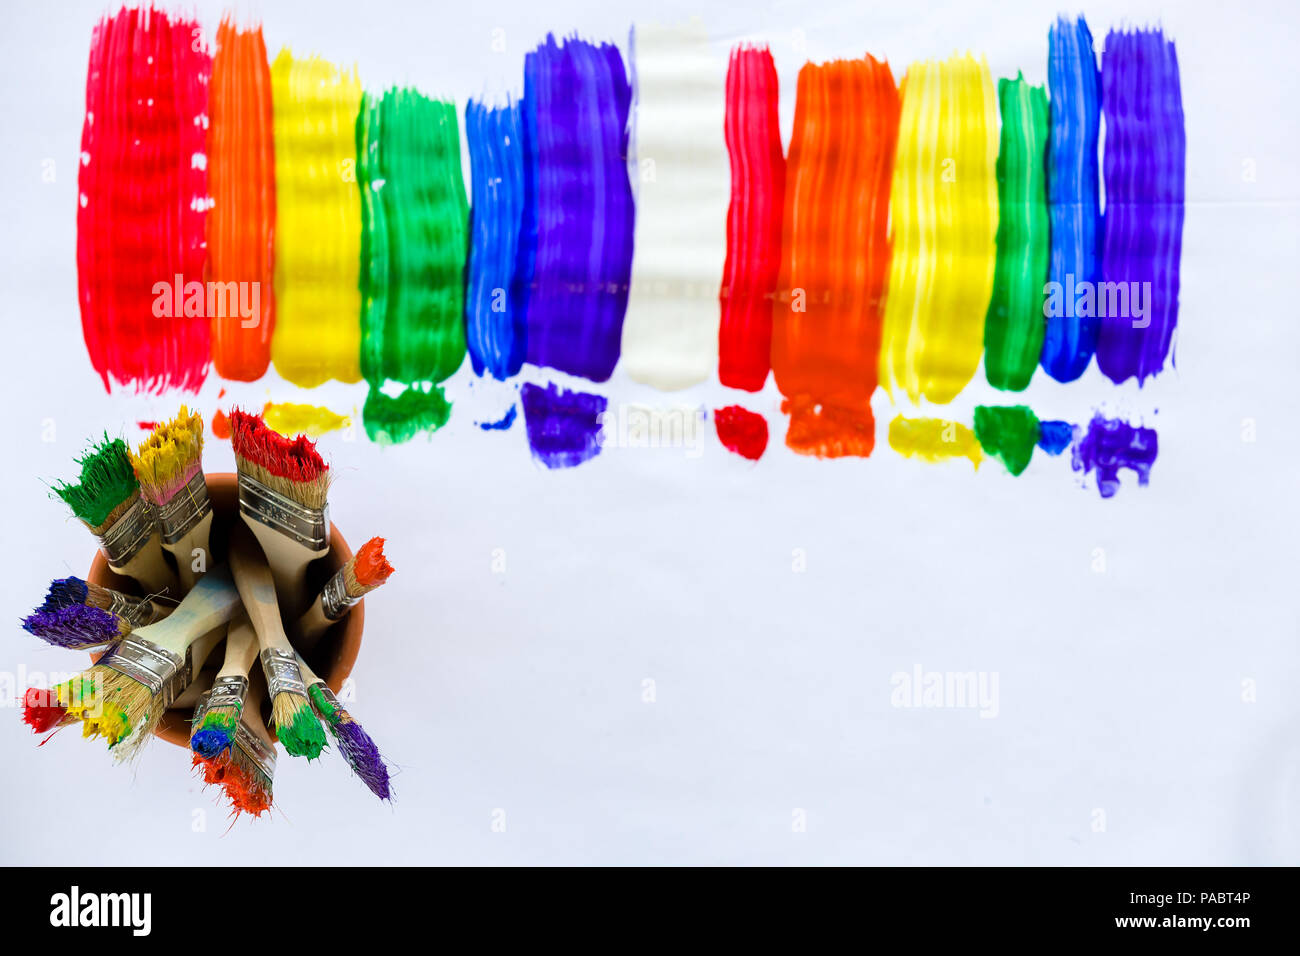 Art and creativity concept with stripes of bright vivid paint in the colors of the rainbow and a jar full of dirty colorful paint brushes forming a fr Stock Photo